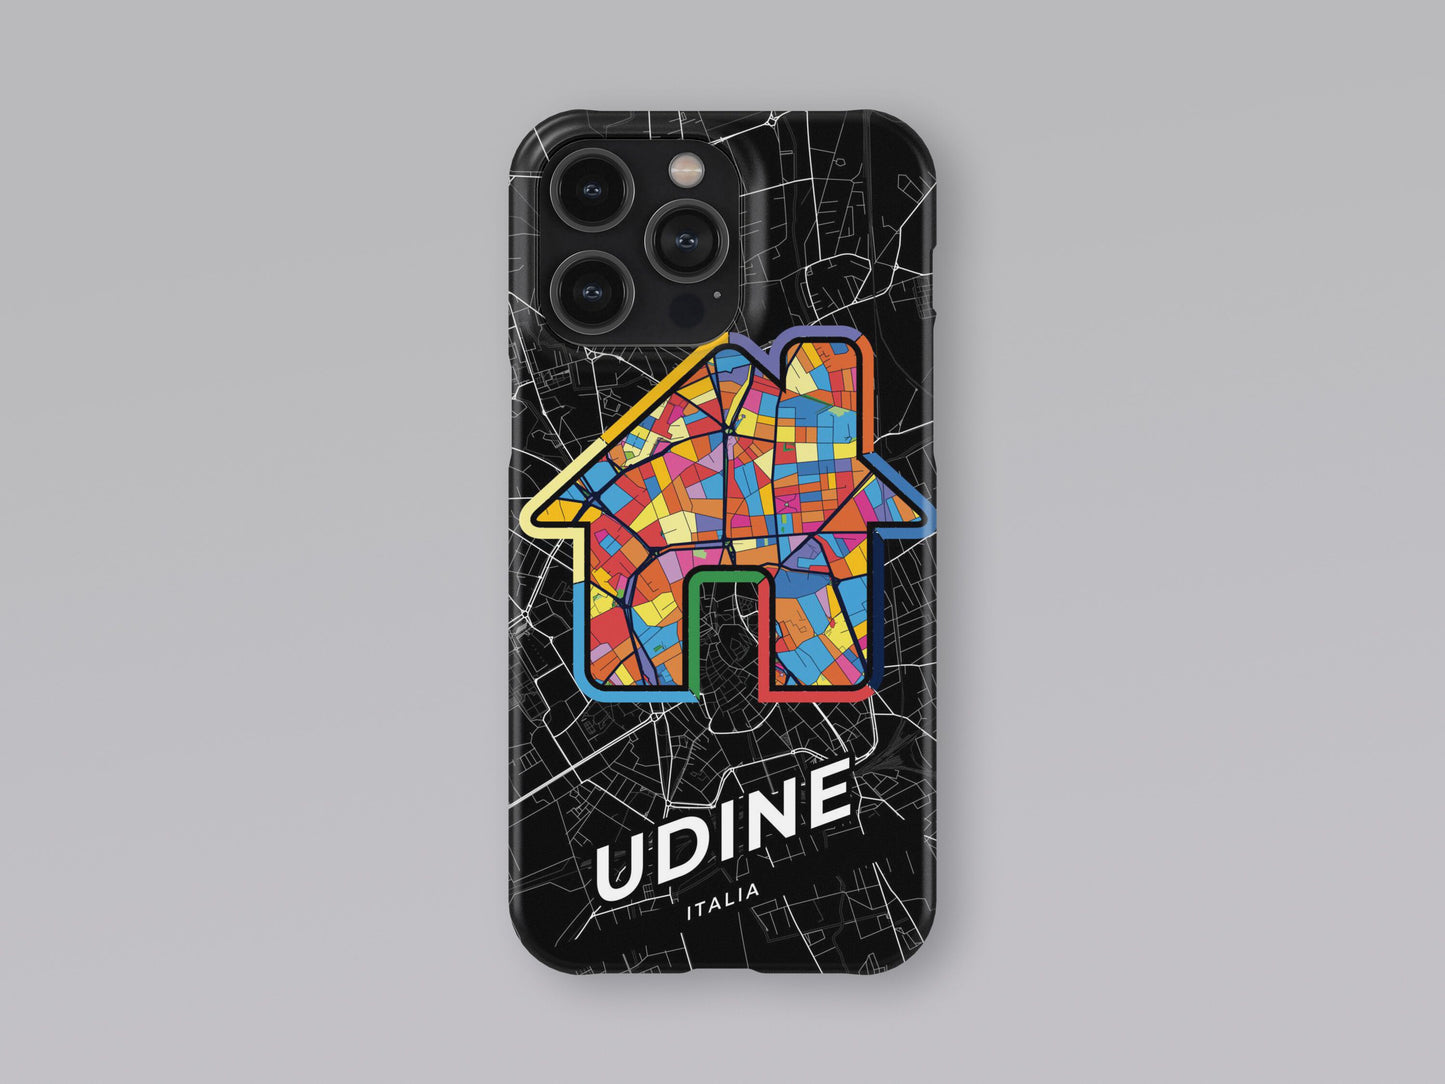 Udine Italy slim phone case with colorful icon 3